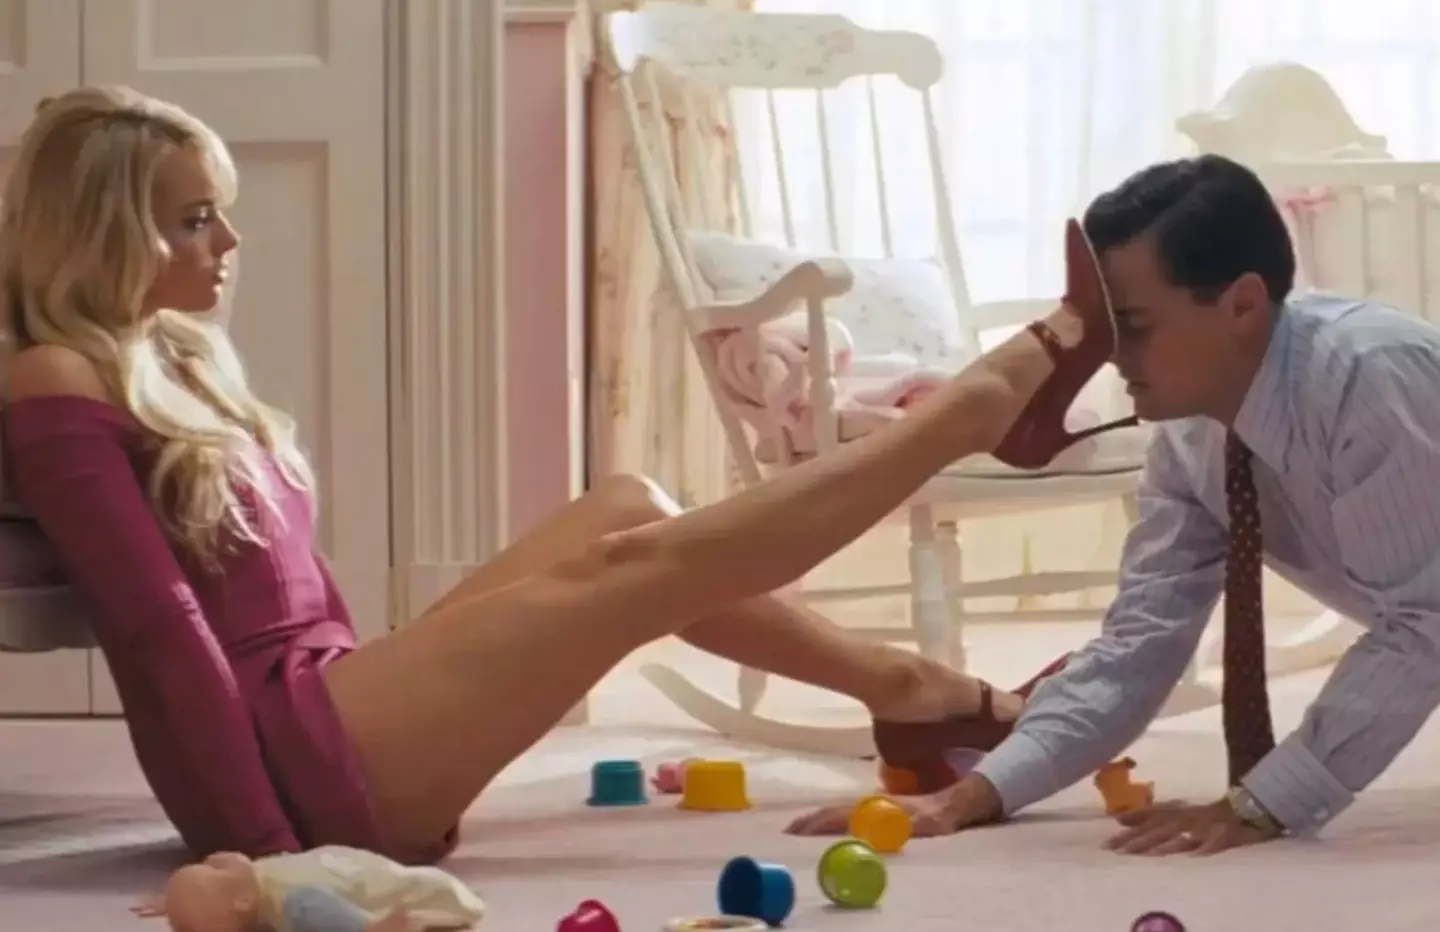 Margot Robbie and Leonardo DiCaprio in The Wolf of Wall Street. (Paramount Pictures)